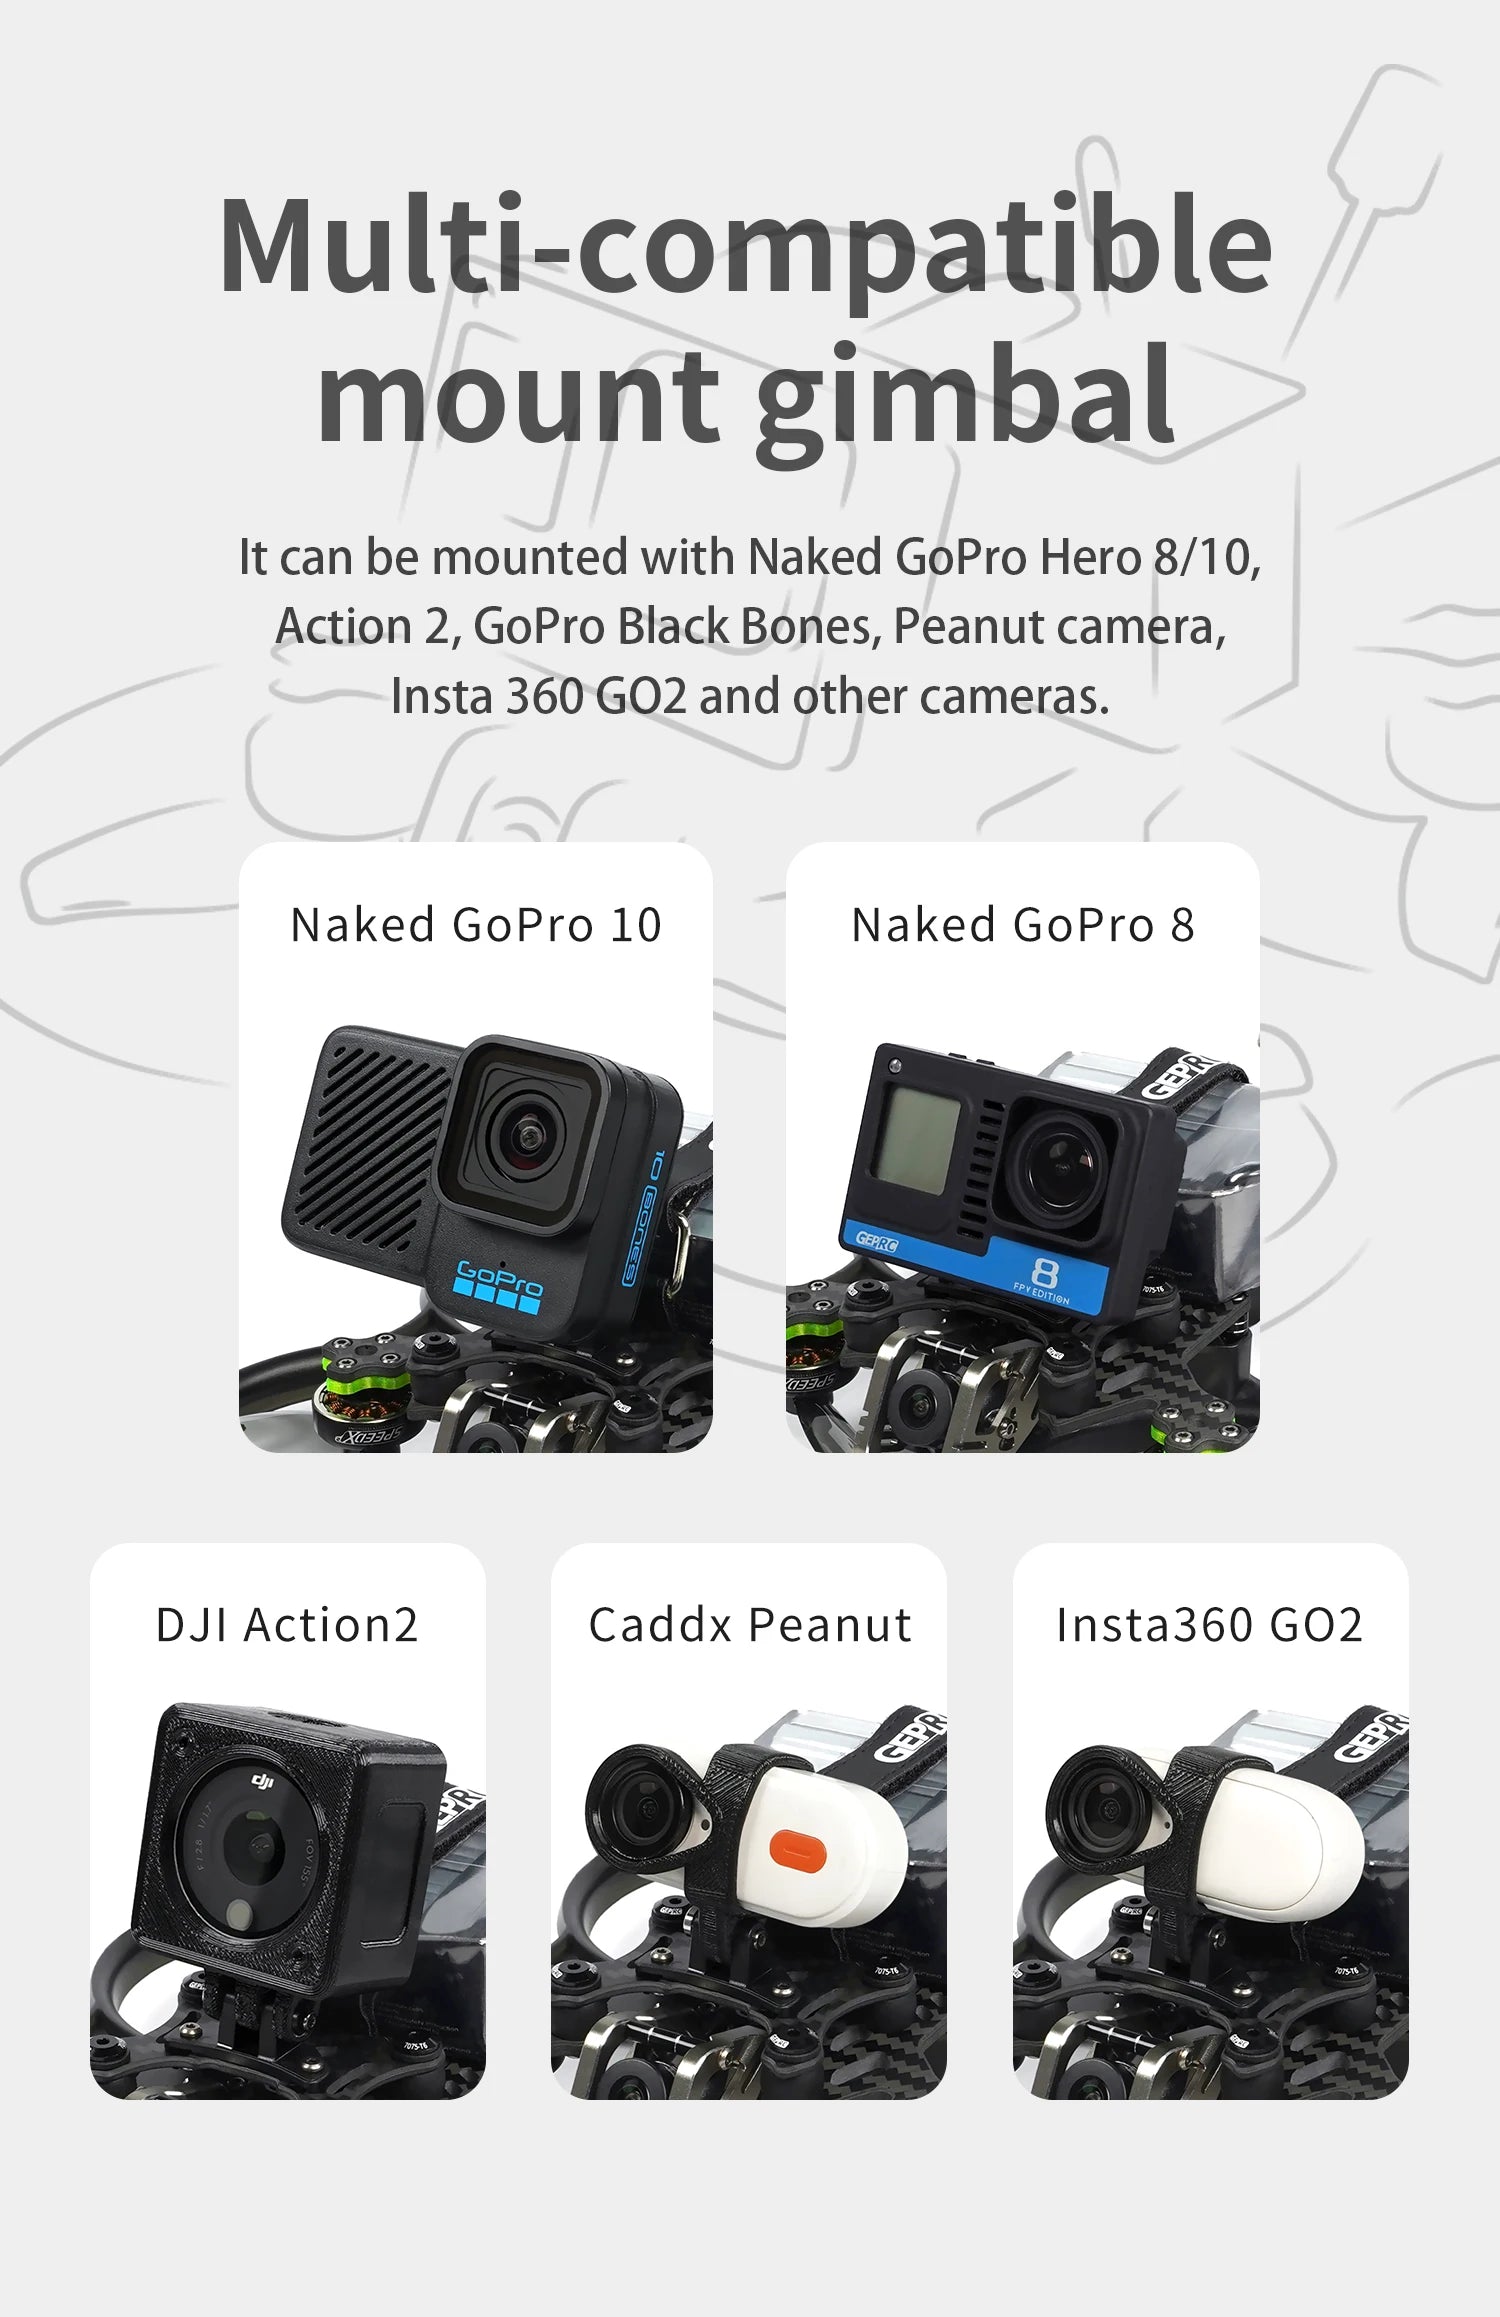 GEPRC NEW Cinebot30  FPV Drone, gimbal can be mounted with Naked GoPro Hero 8/10, Action 2, Go